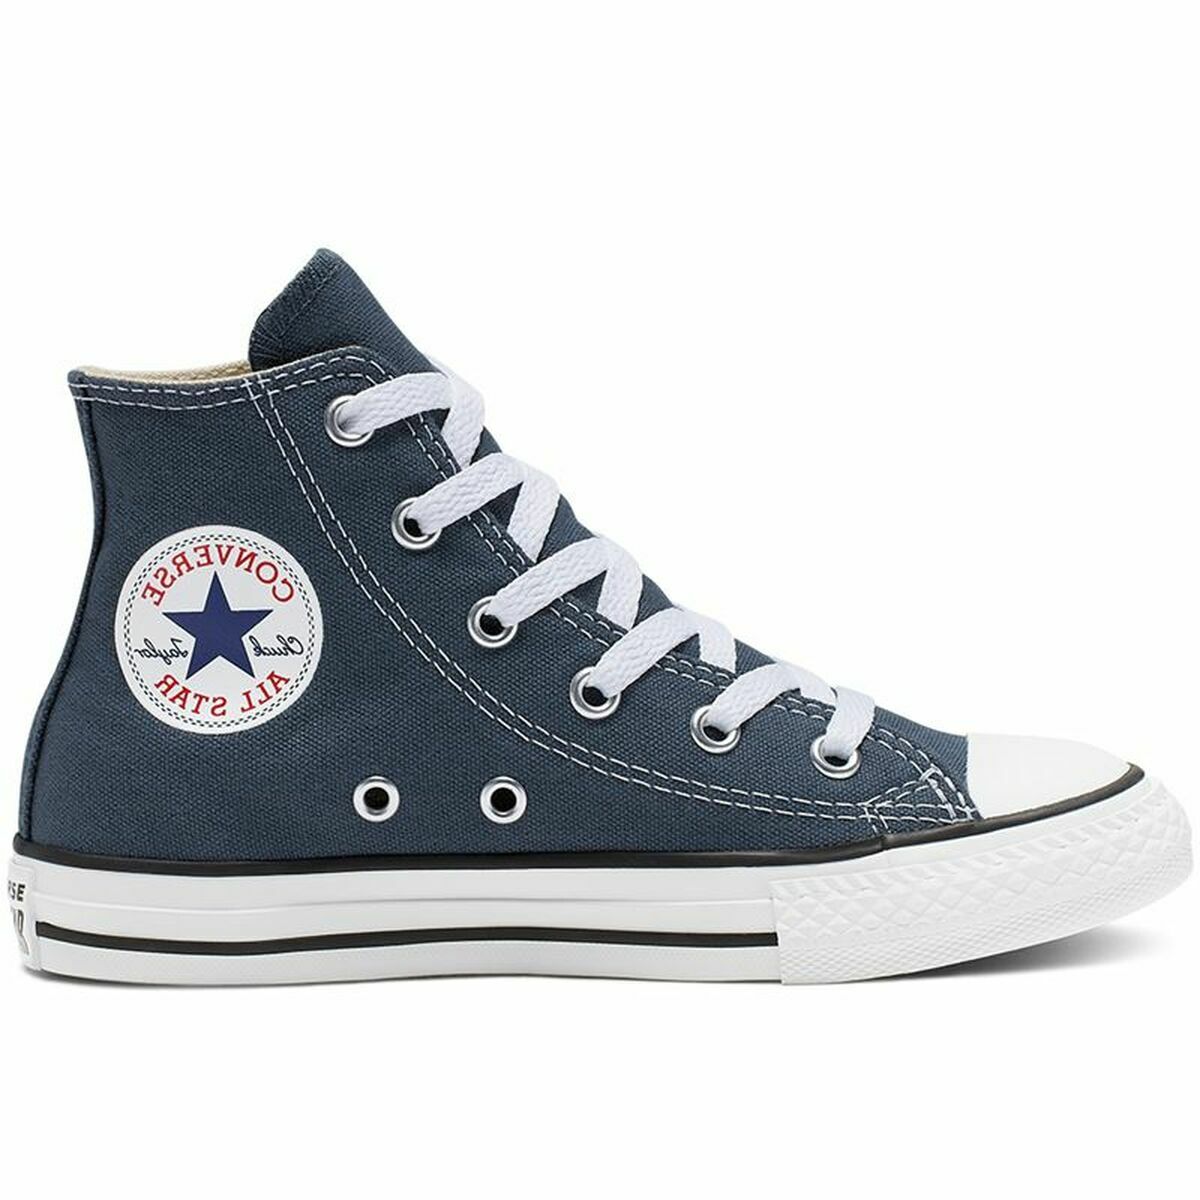 Sports Shoes For Kids Converse Chuck Taylor All Star Classic Dark Blue-Fashion | Accessories > Clothes and Shoes > Casual trainers-Converse-Urbanheer